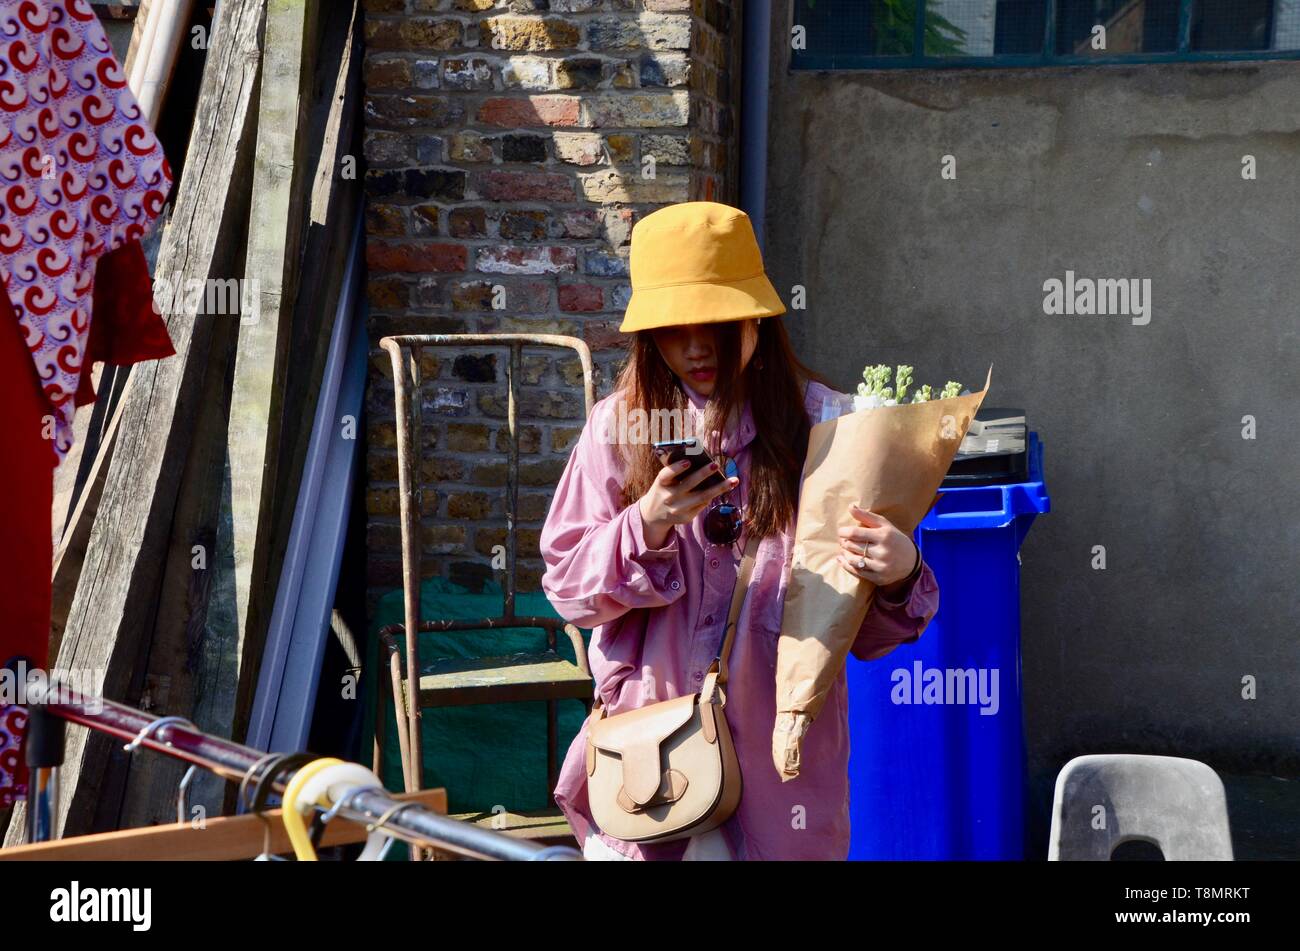 japanese tourist holding flowers looking at her phone columbia road london Stock Photo